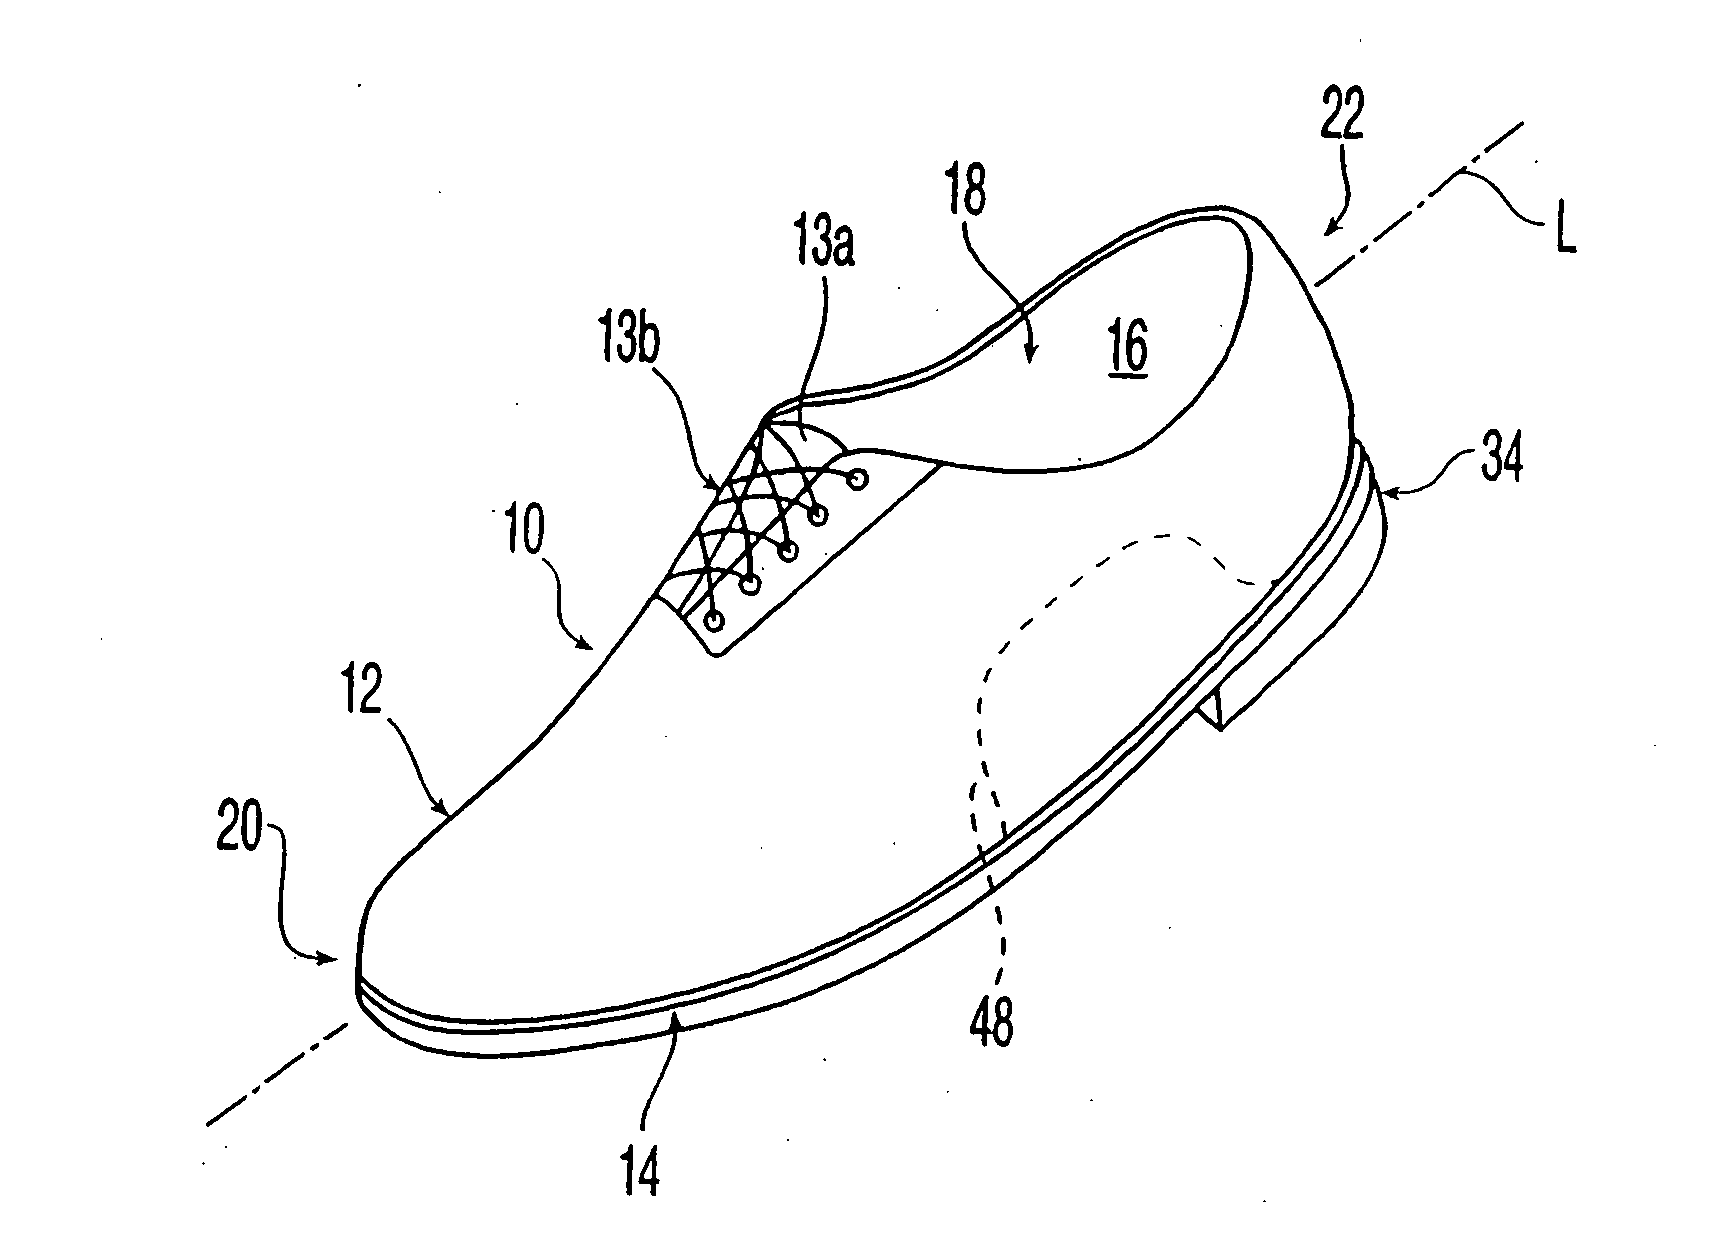 Shoe with sensors, controller and active-response elements and method for use thereof